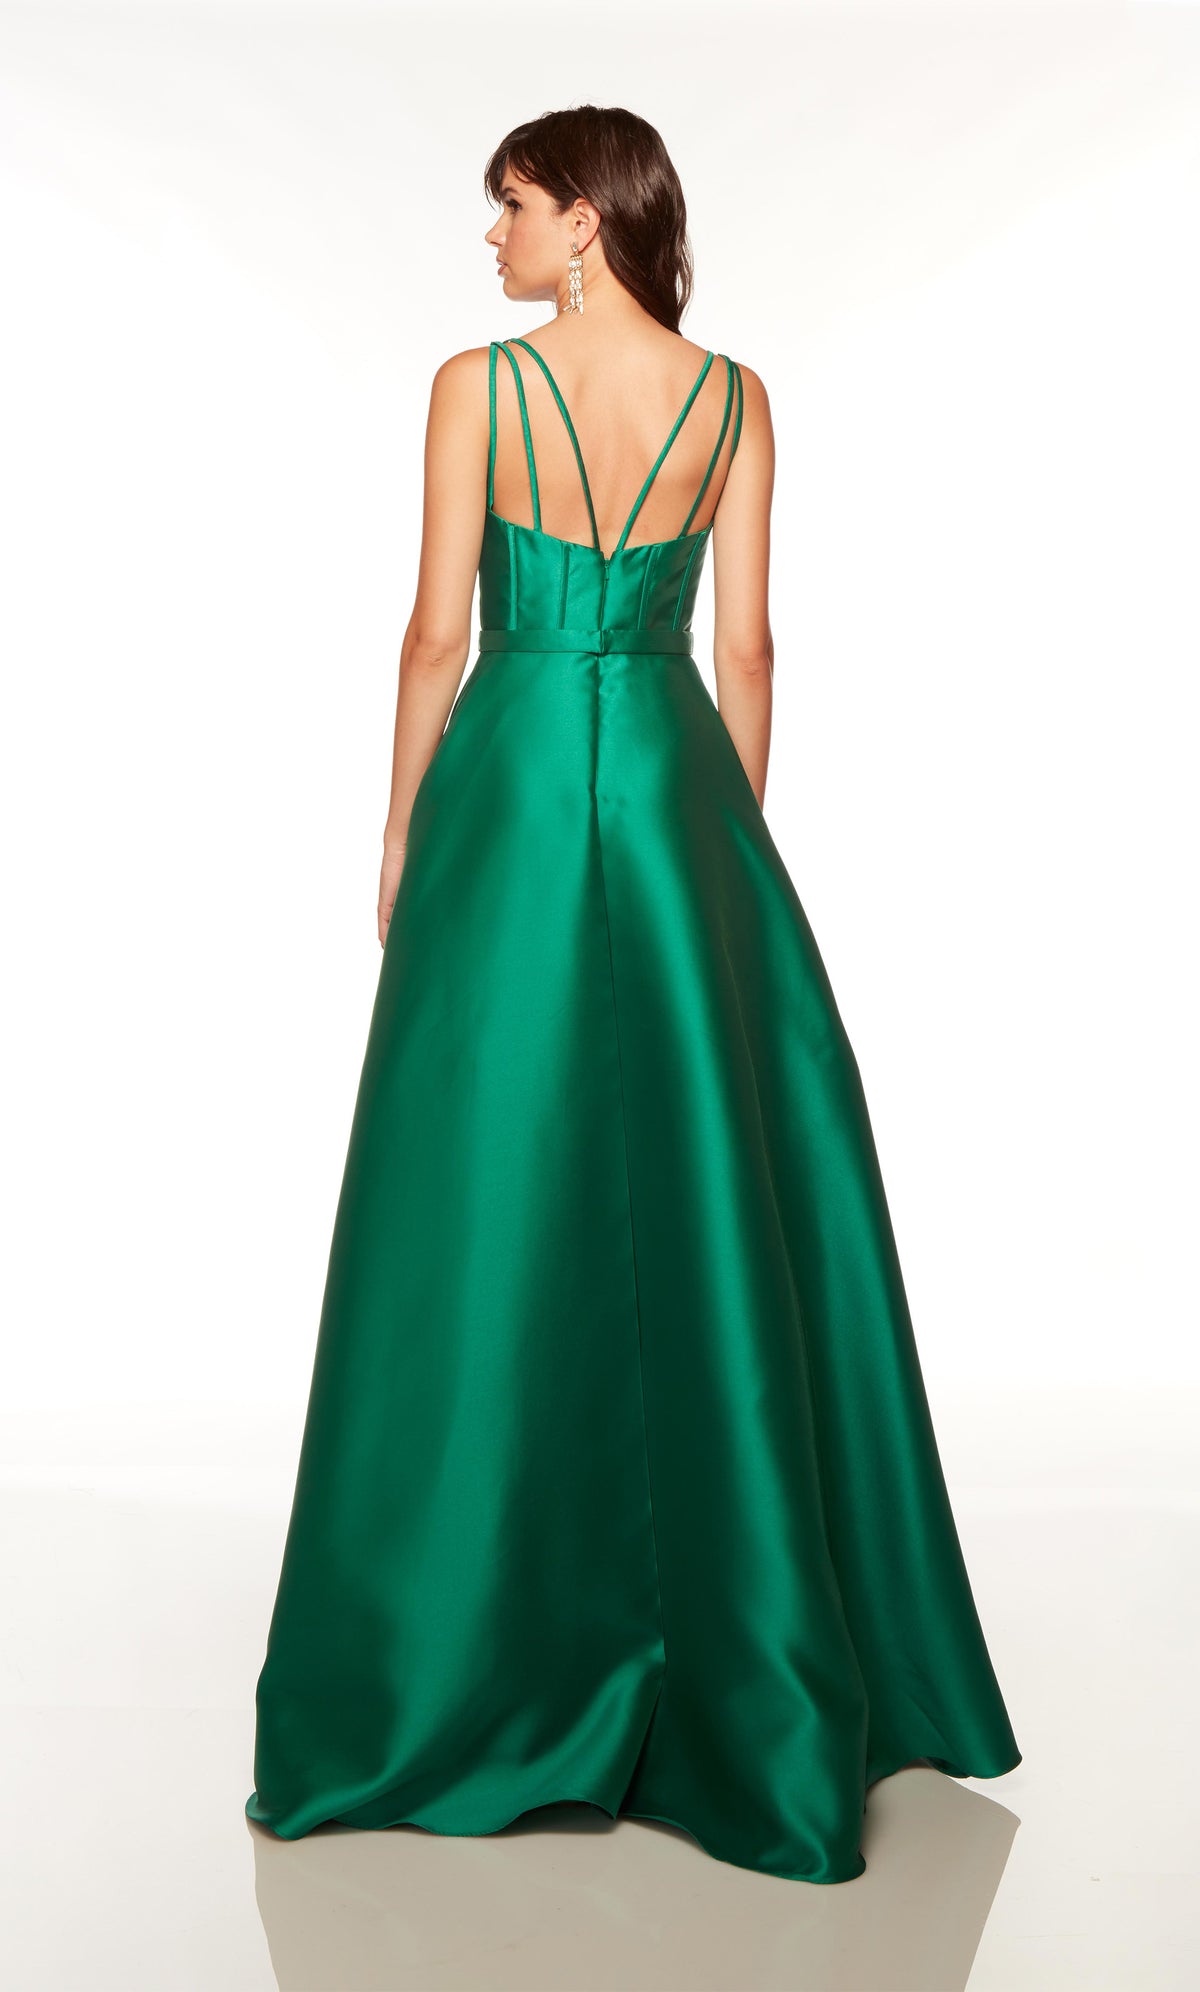 Green evening dress with a strappy back and slight train.